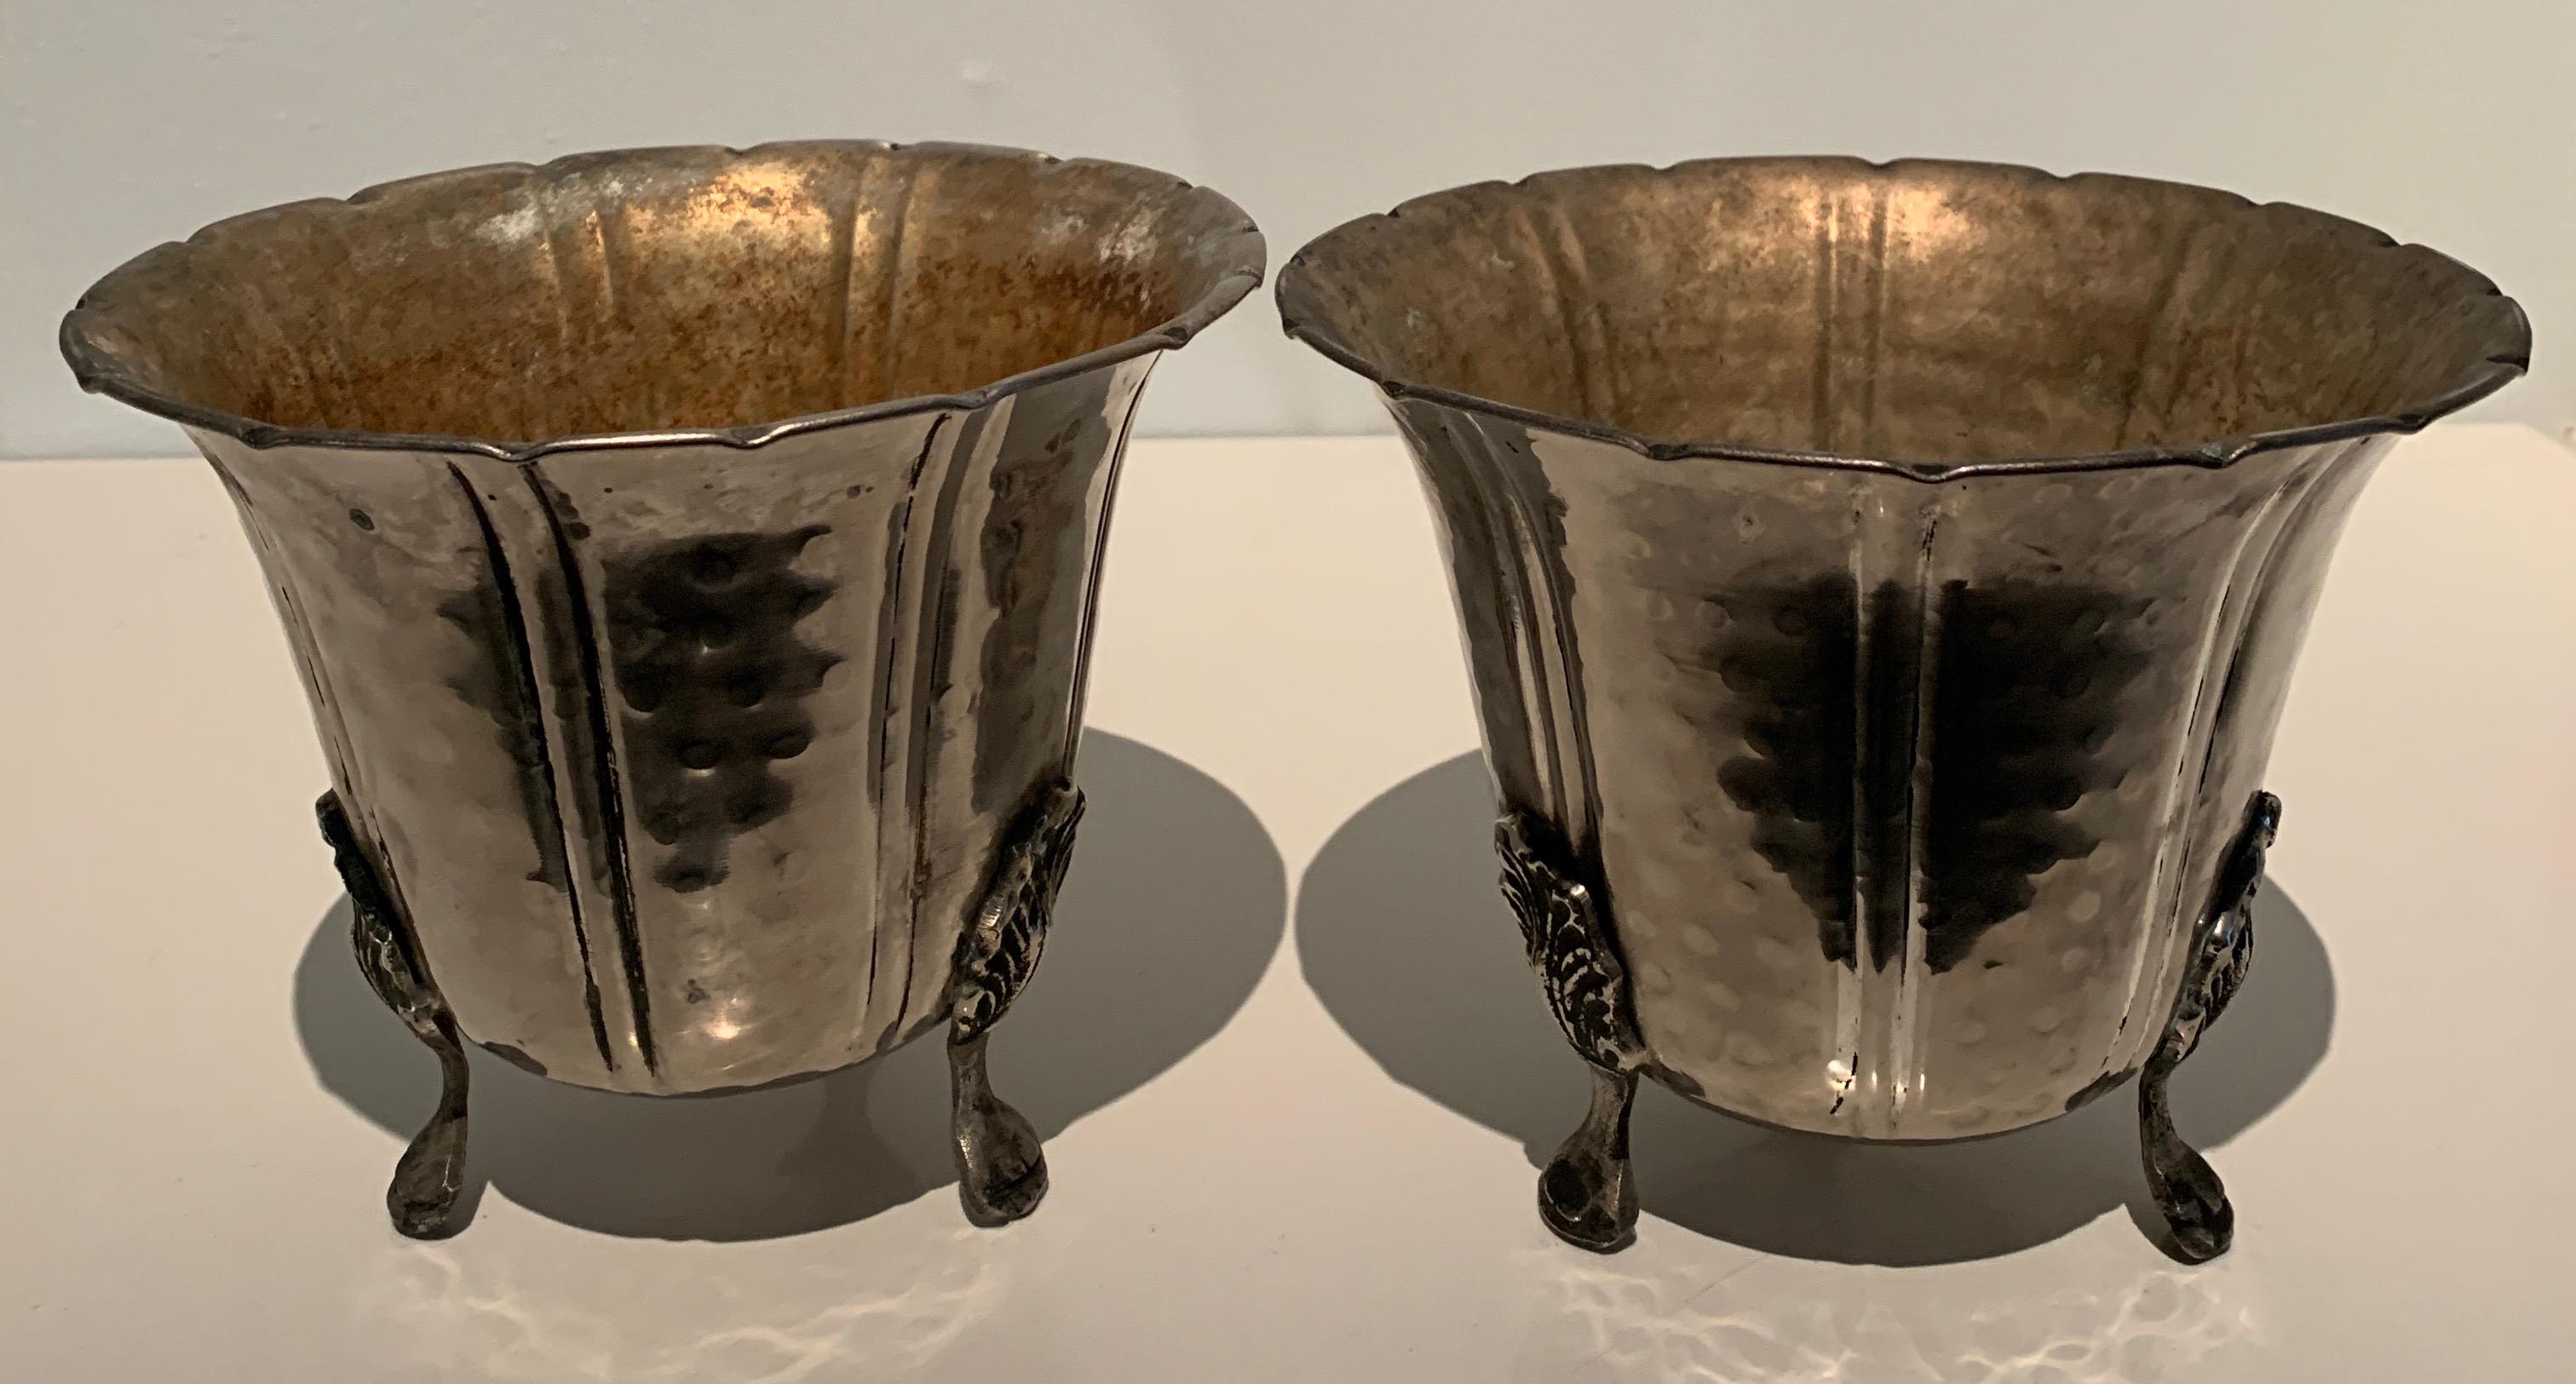 20th Century Pair of French Footed Hammered Silver Planters